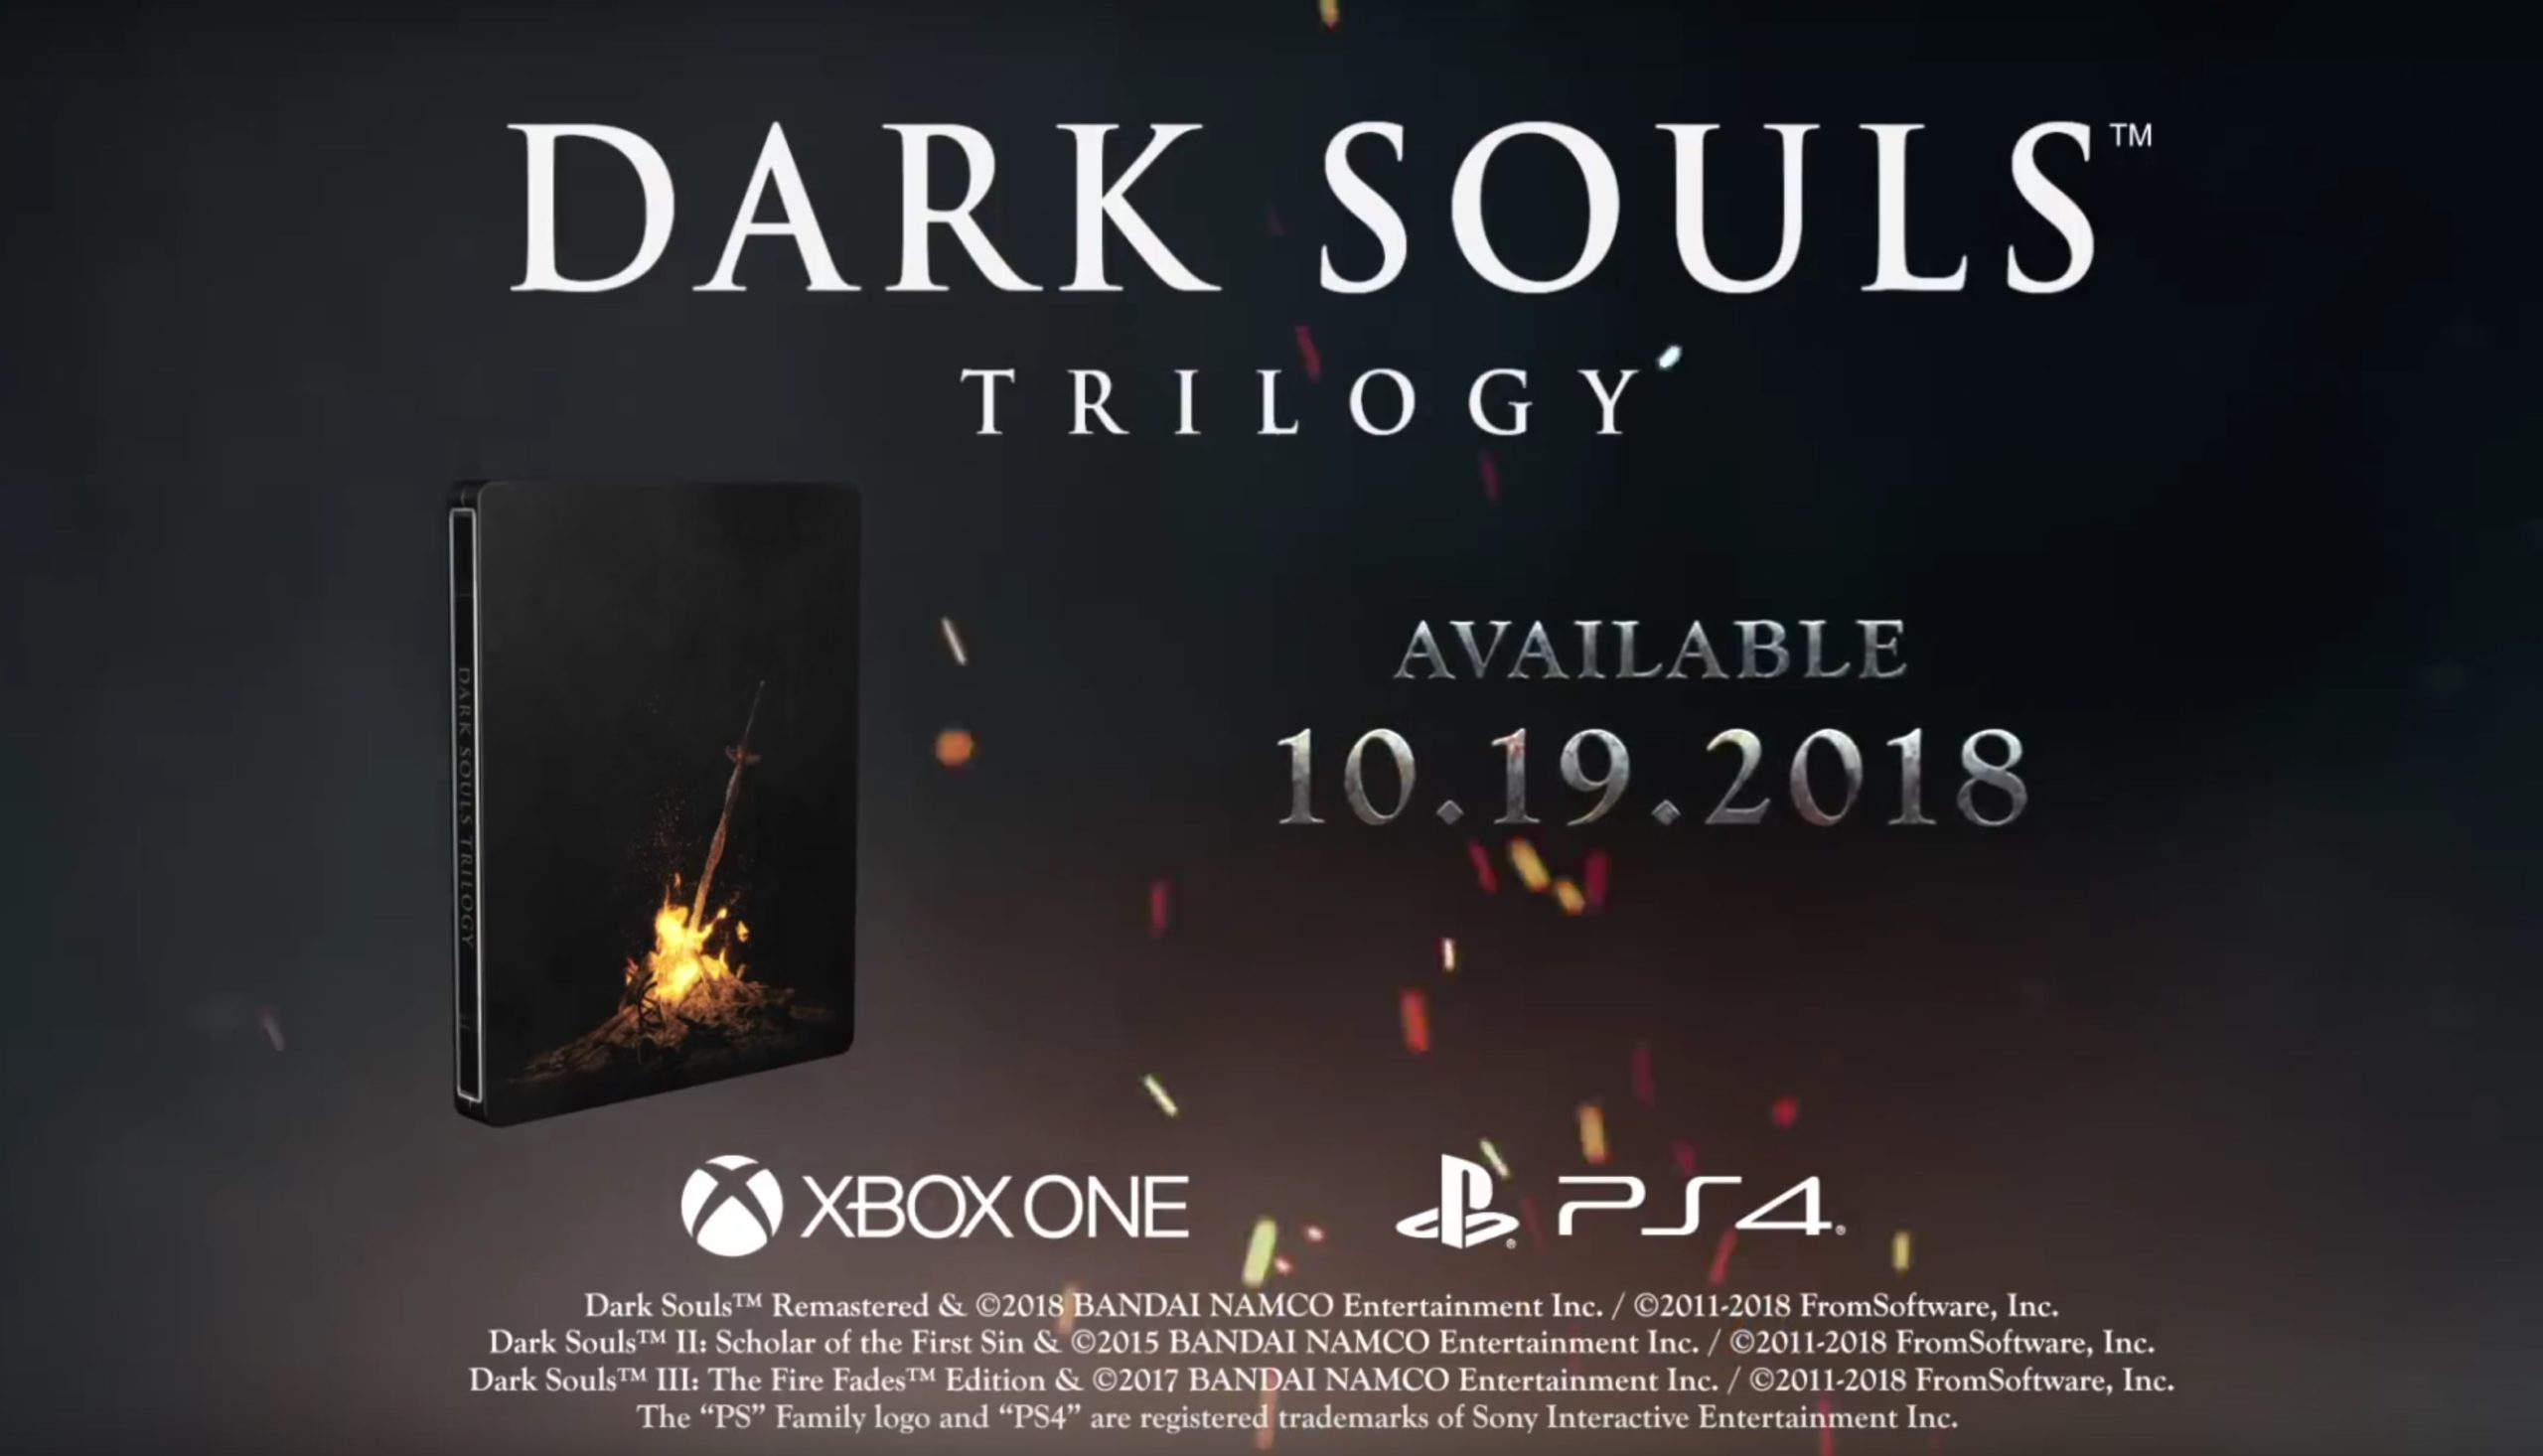 Dark Souls Trilogy Announced, Features Three Games & All DLC